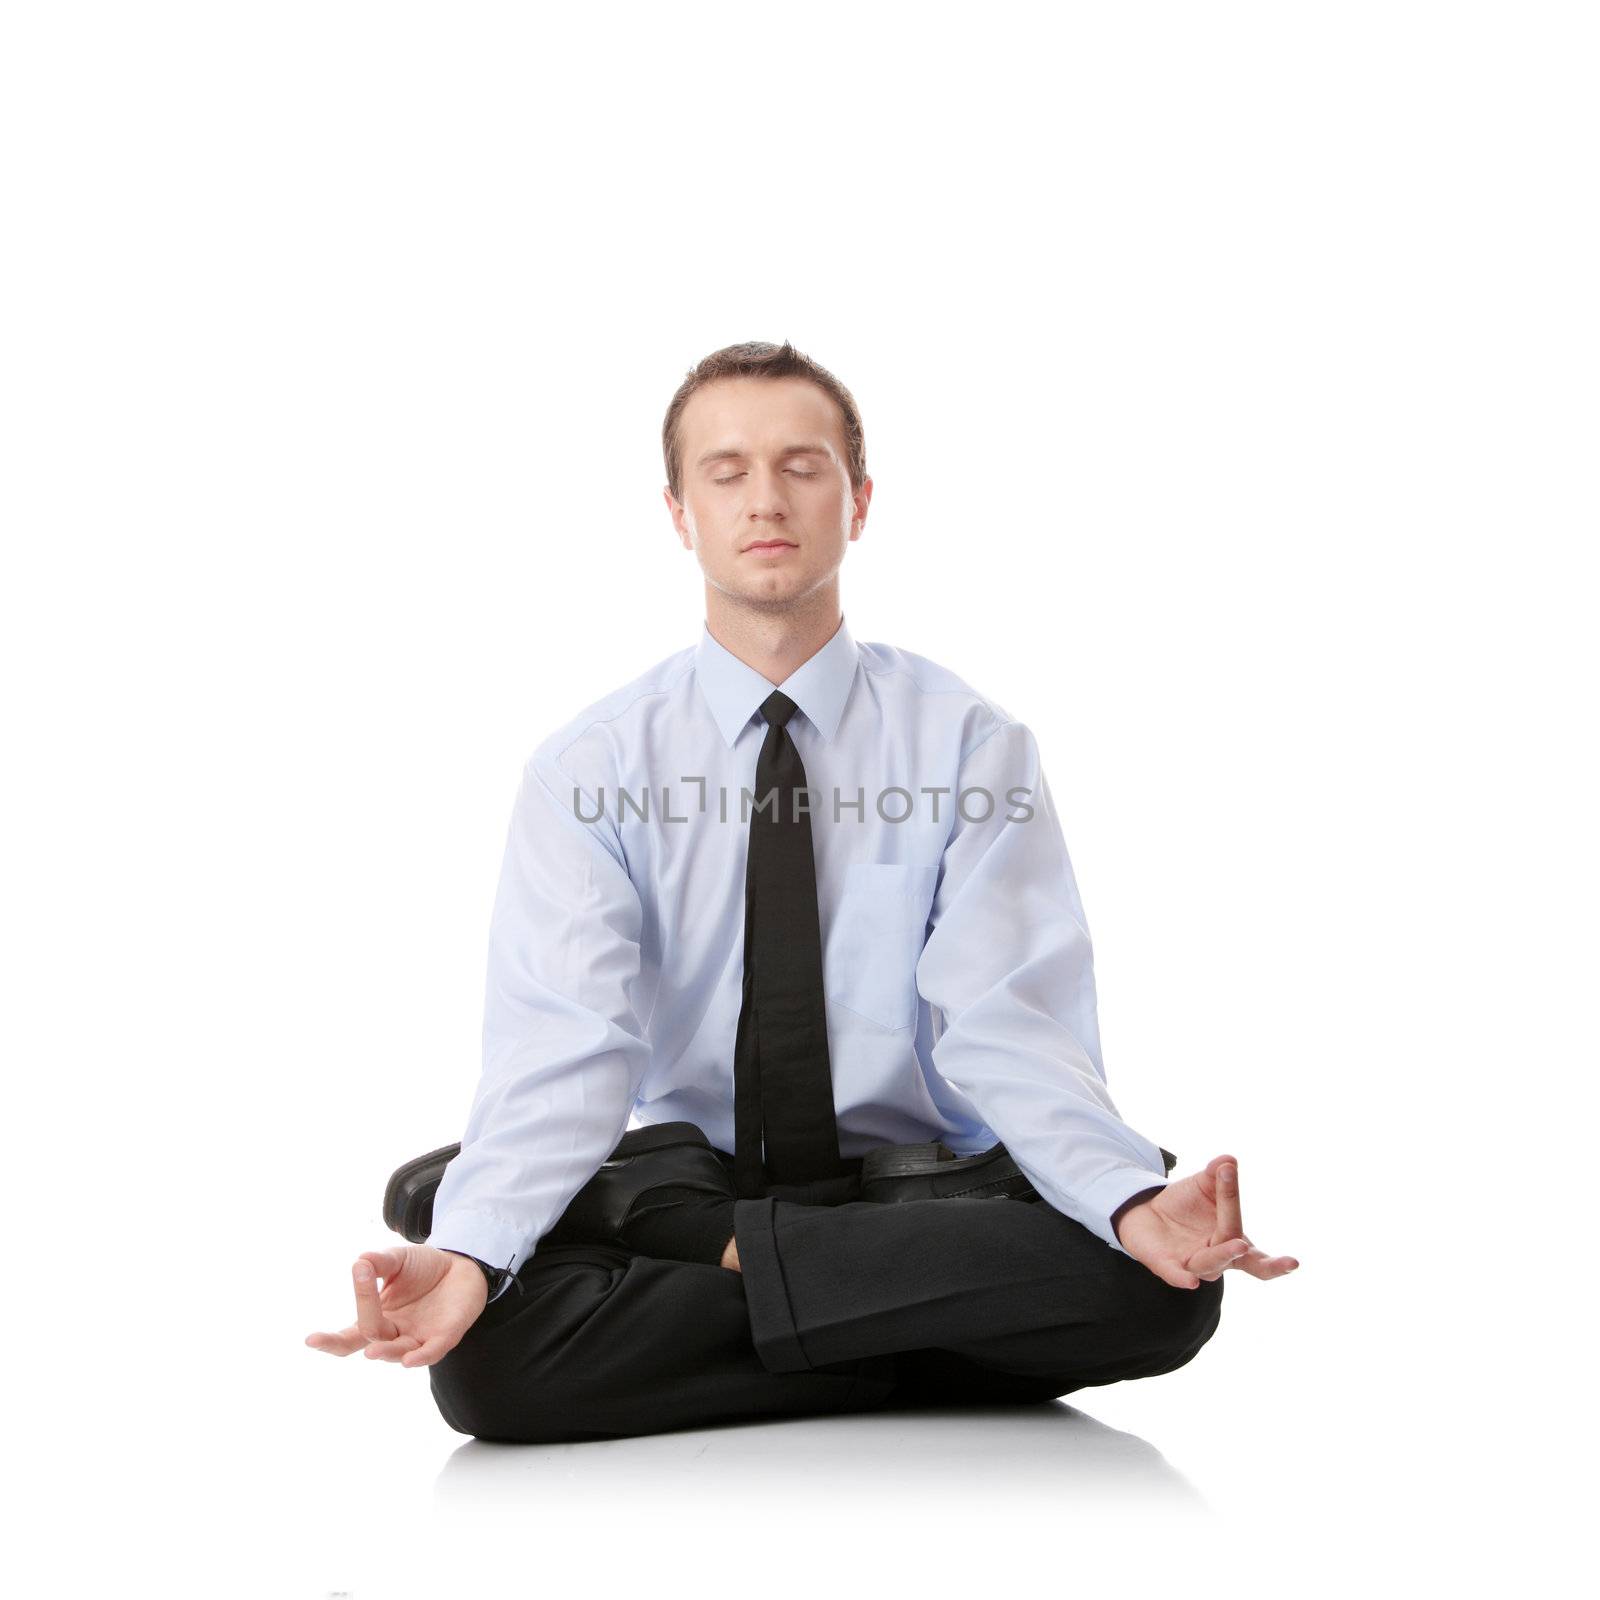 Businessman sitting in lotus position, Isolated against white background